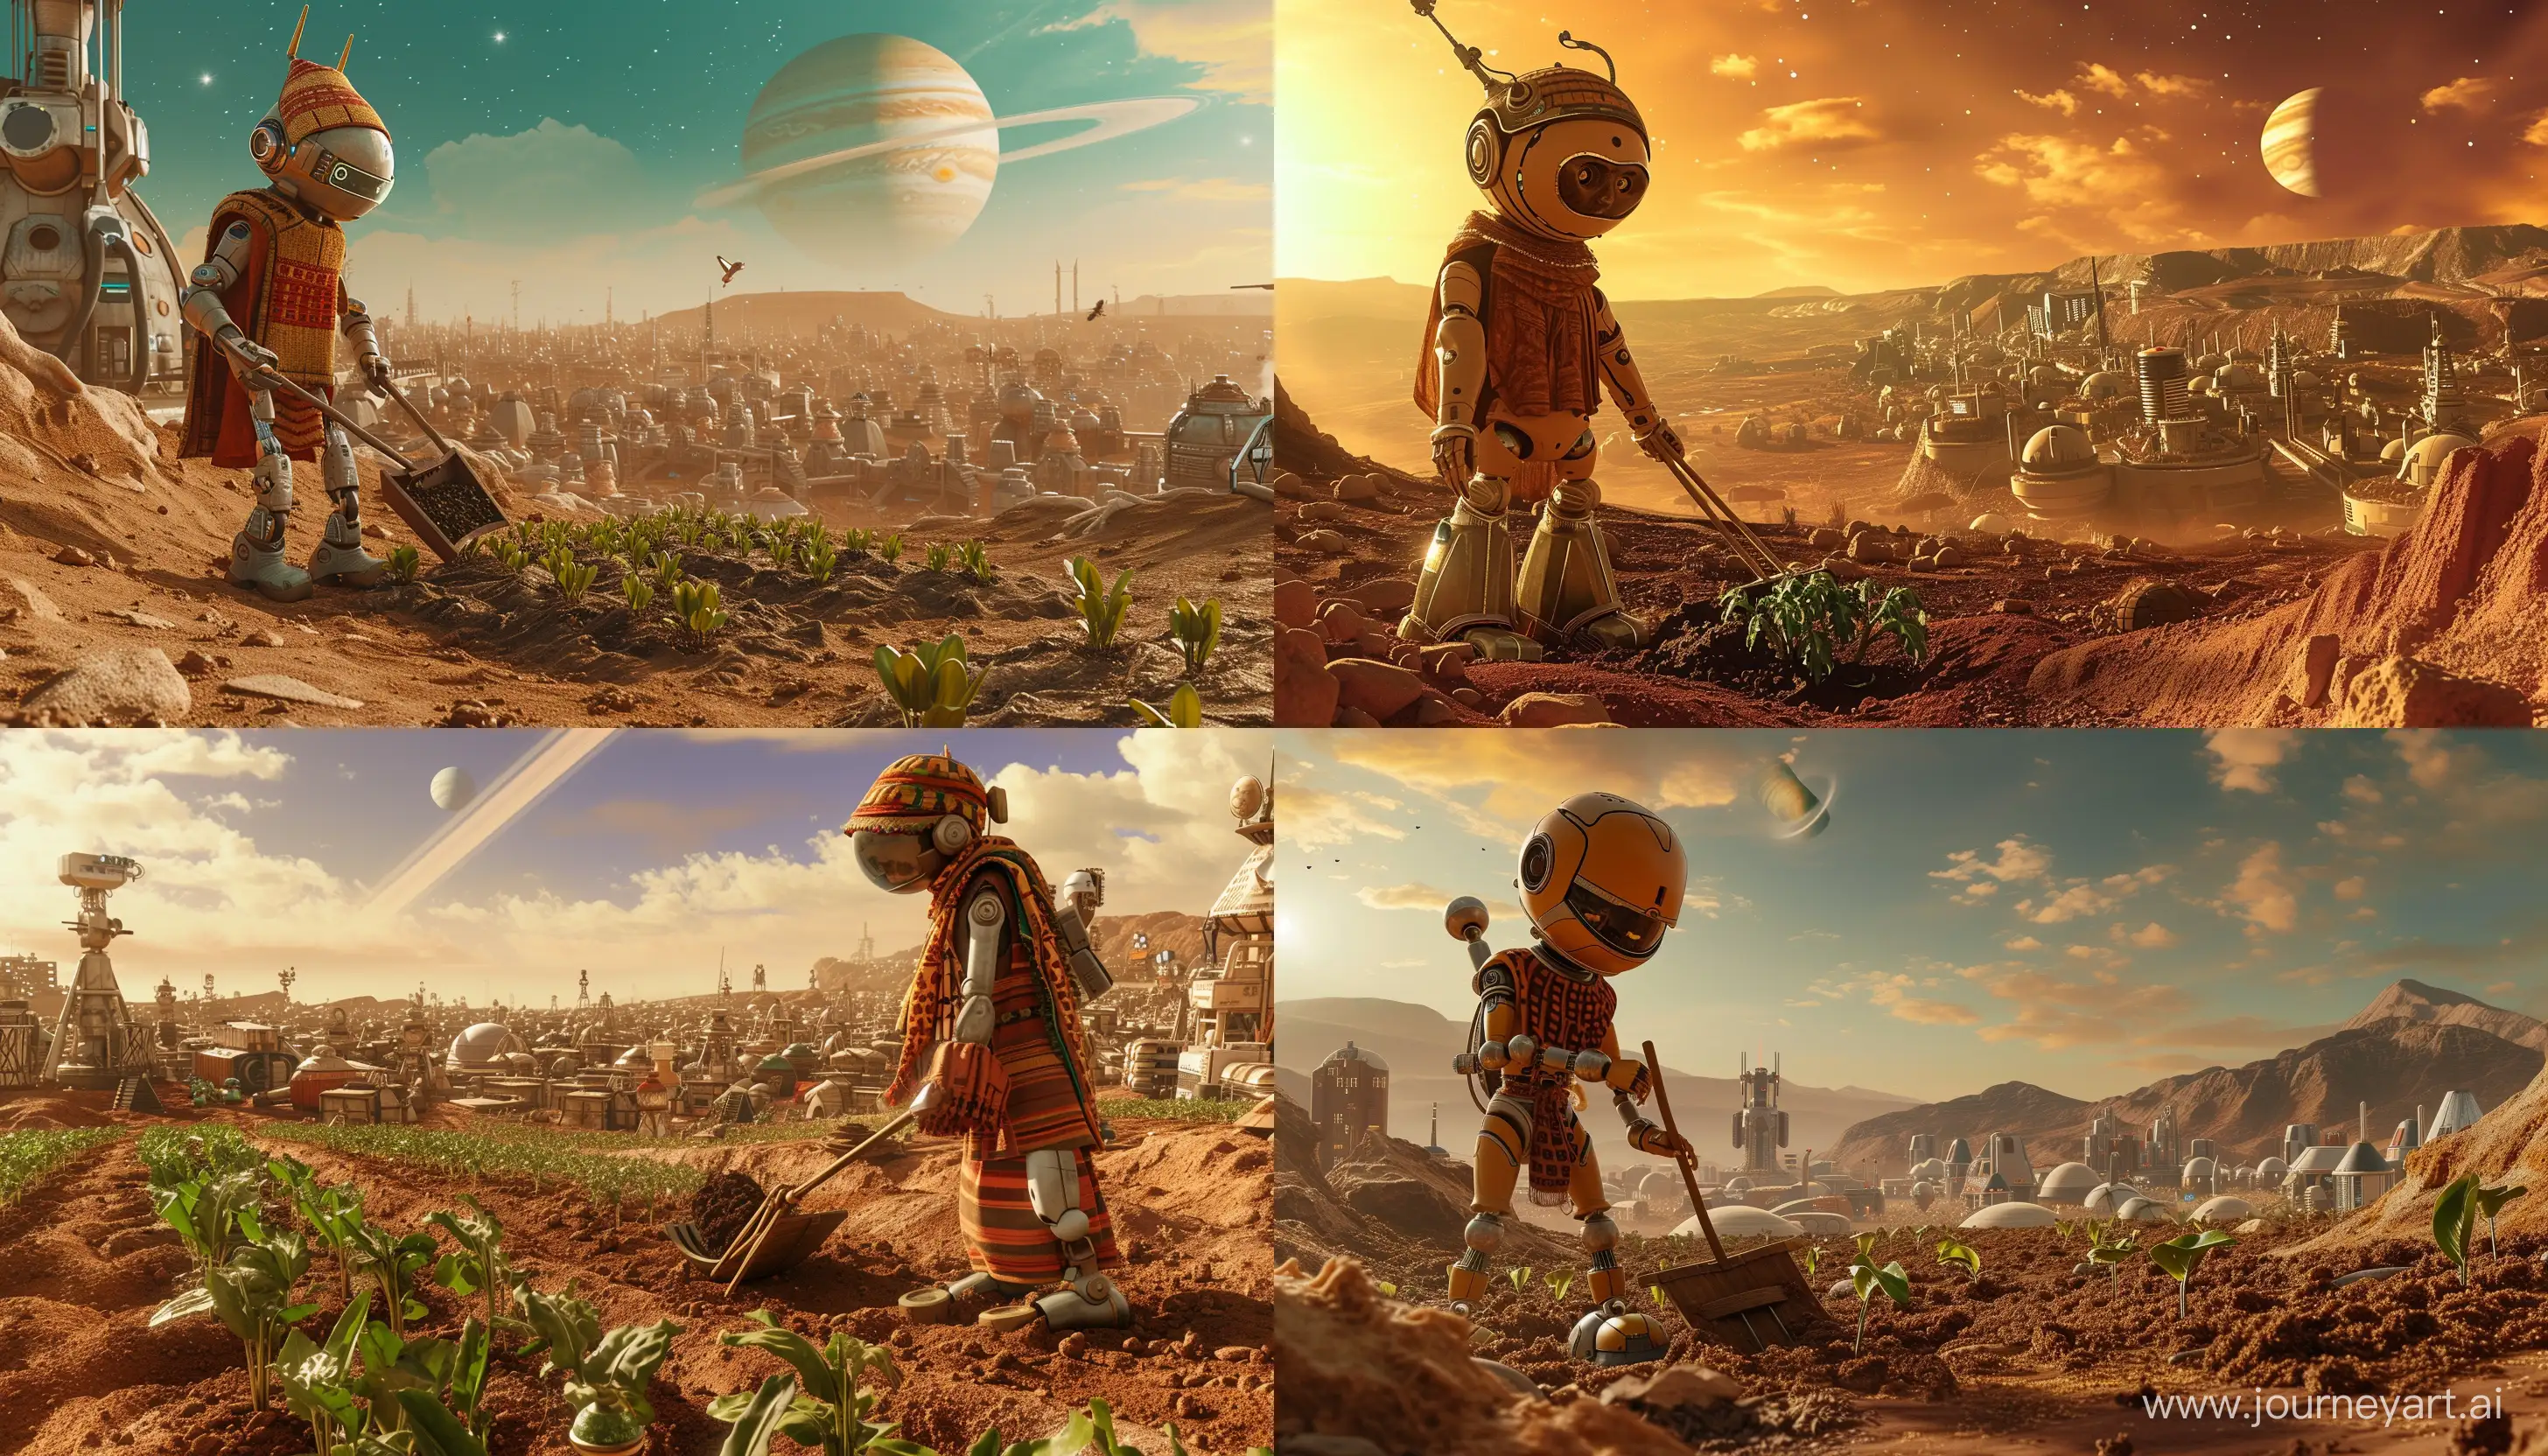 Create a vivid description of a futuristic city on the mars, with Jupiter prominently visible in the sky, a Rebel moon movie robot Jimmy farming A plough and some plants, Jimmy wearing Rebel moon movie traditional clothing --aspect 7:4